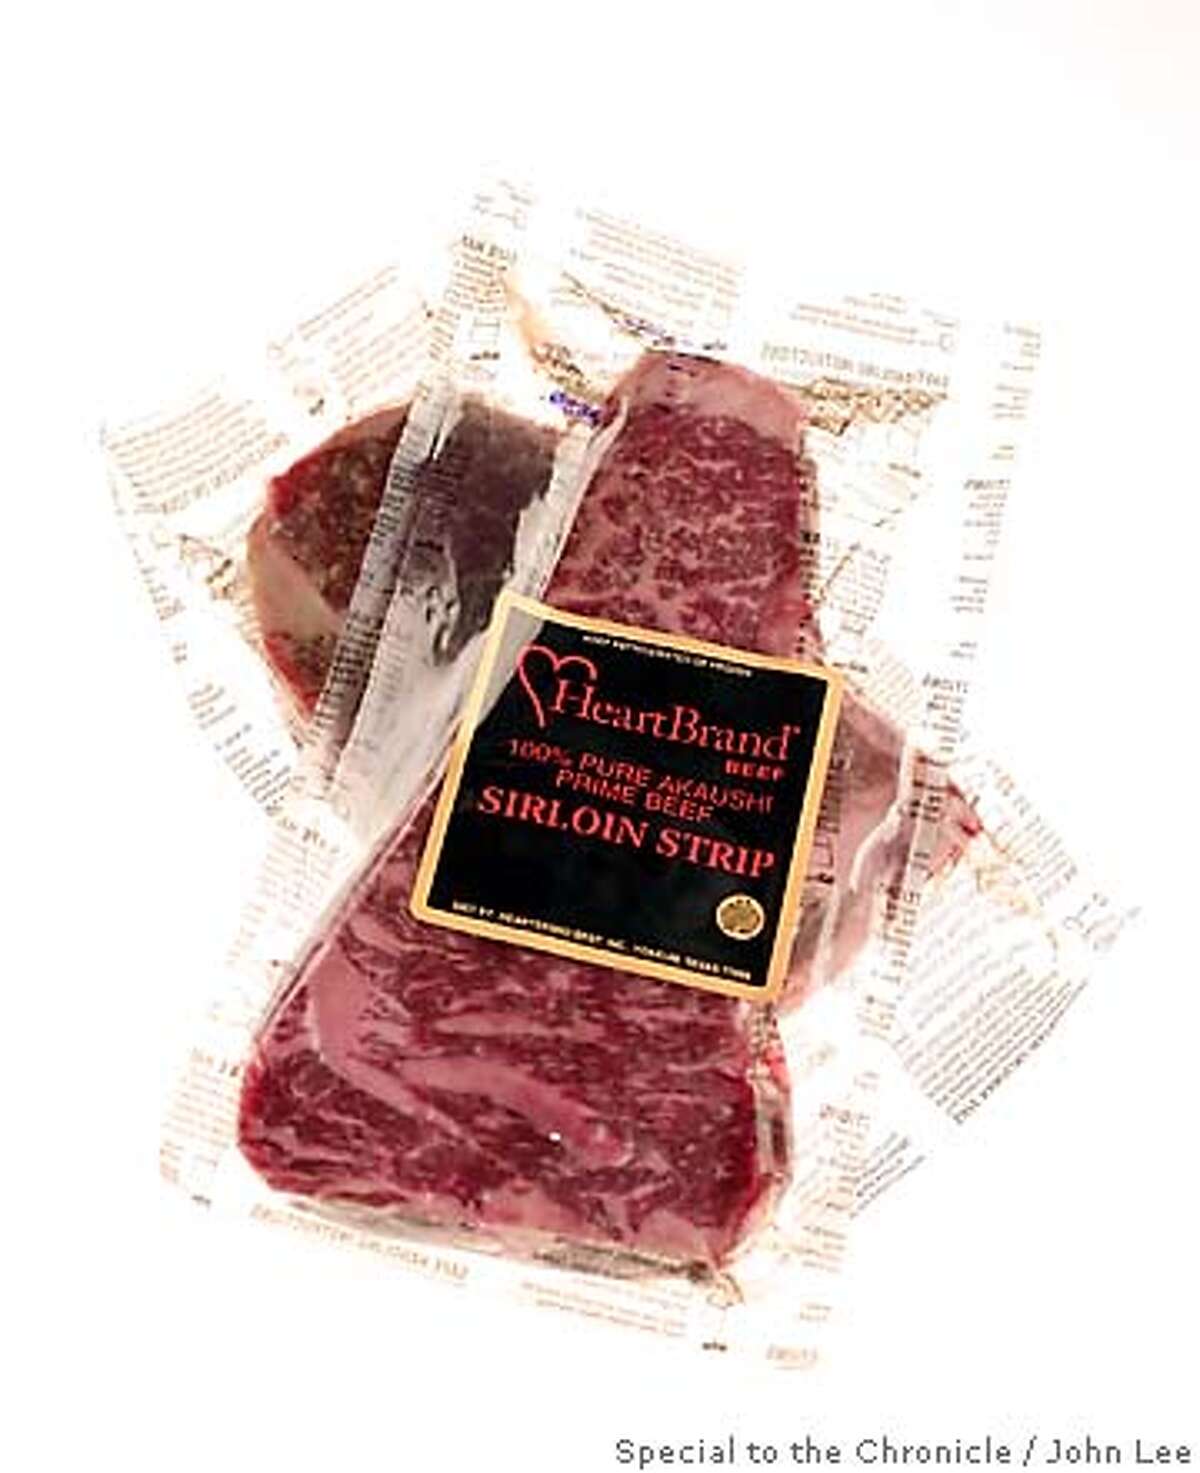 WHATS22_03JOHNLEE.JPG Heart Brand Beef Akaushi steaks. By JOHN LEE/SPECIAL TO THE CHRONICLE